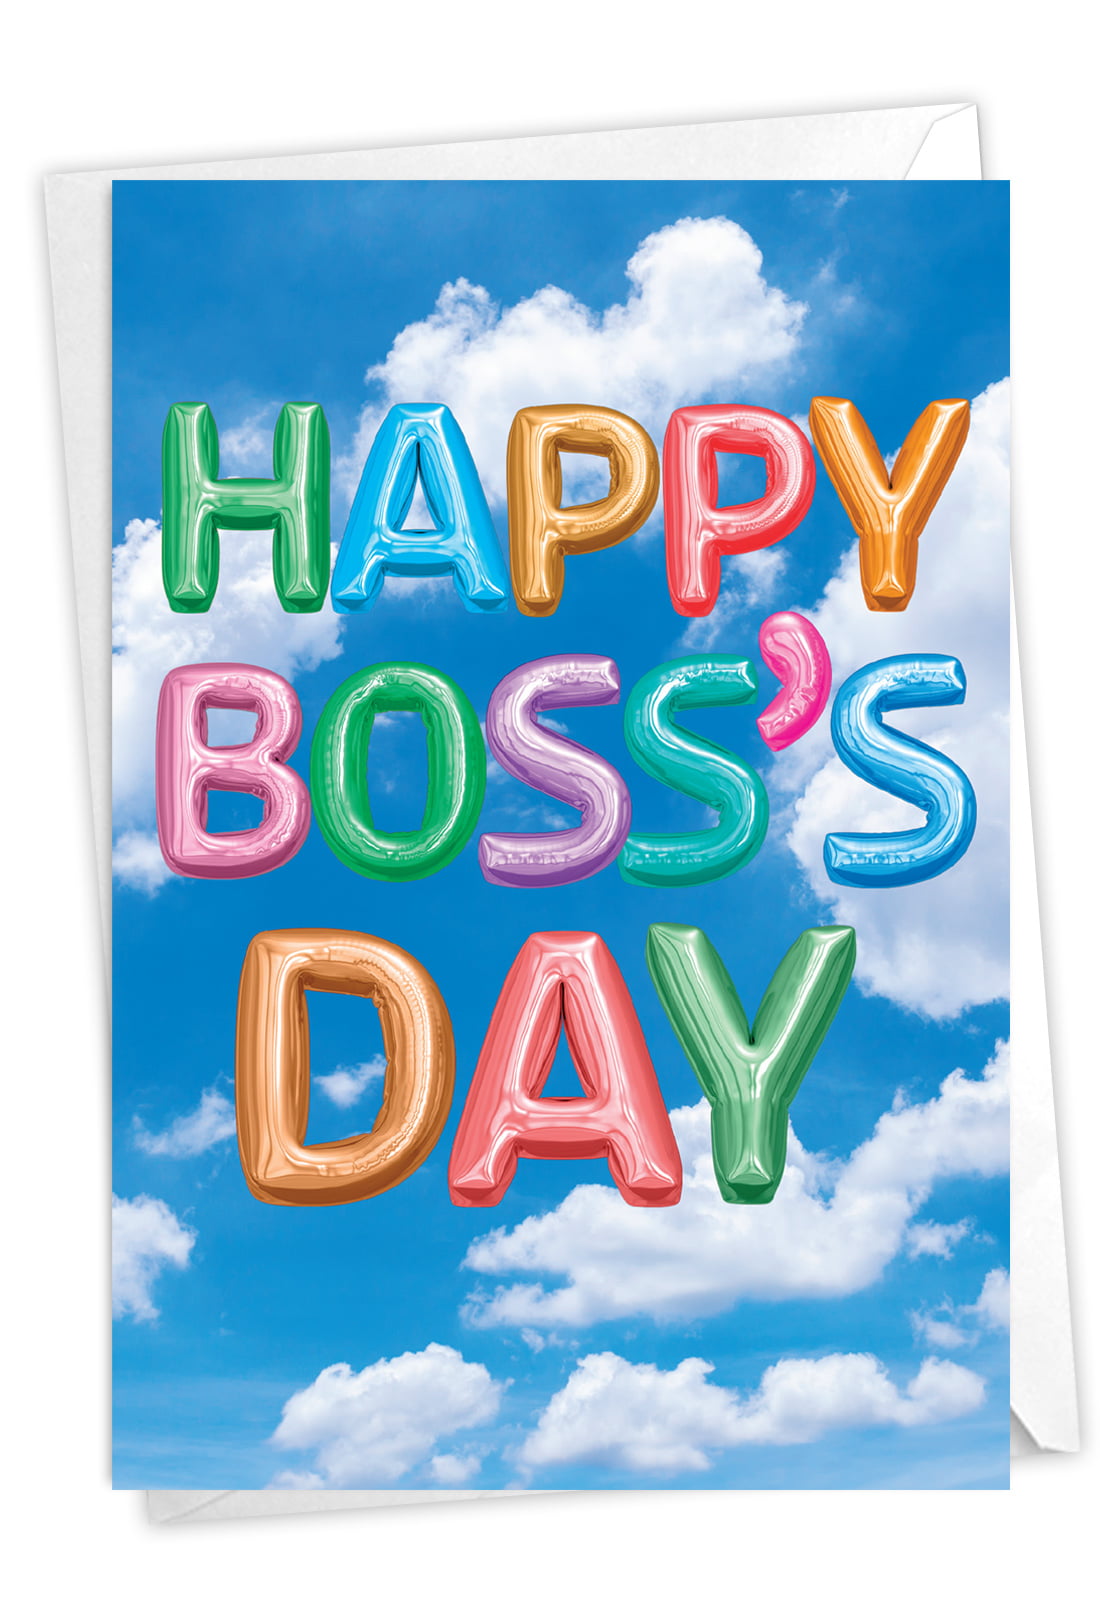 happy-boss-s-day-greeting-card-notecard-for-boss-manager-mentor